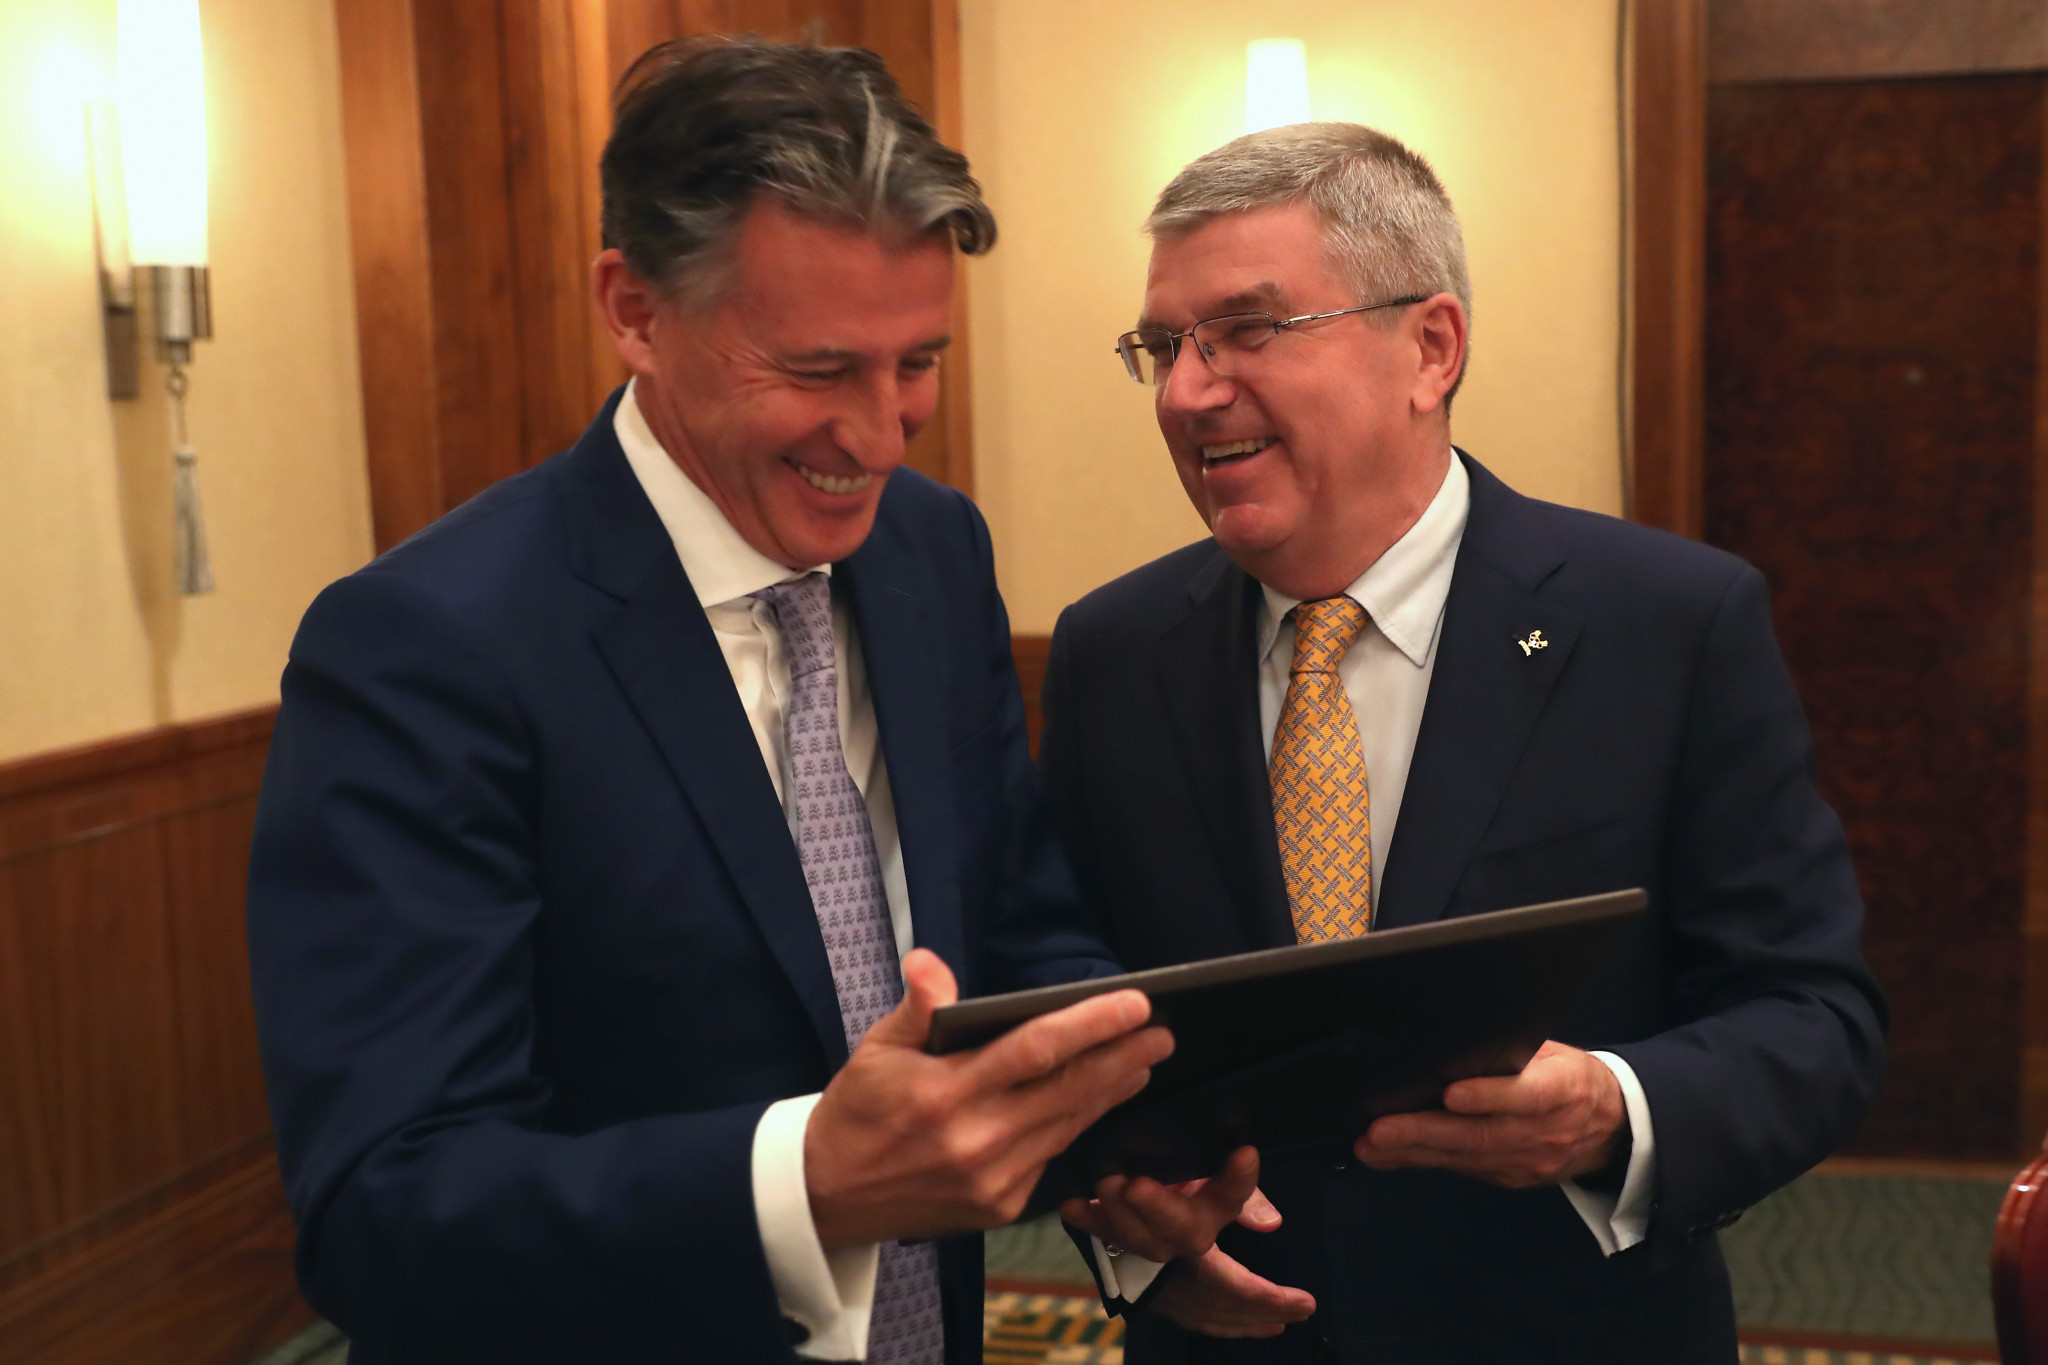 If Thomas Bach, right, is allowed to stay on as IOC President it would almost certainly end any chance of Sebastian Coe, left, succeeding him ©Getty Images